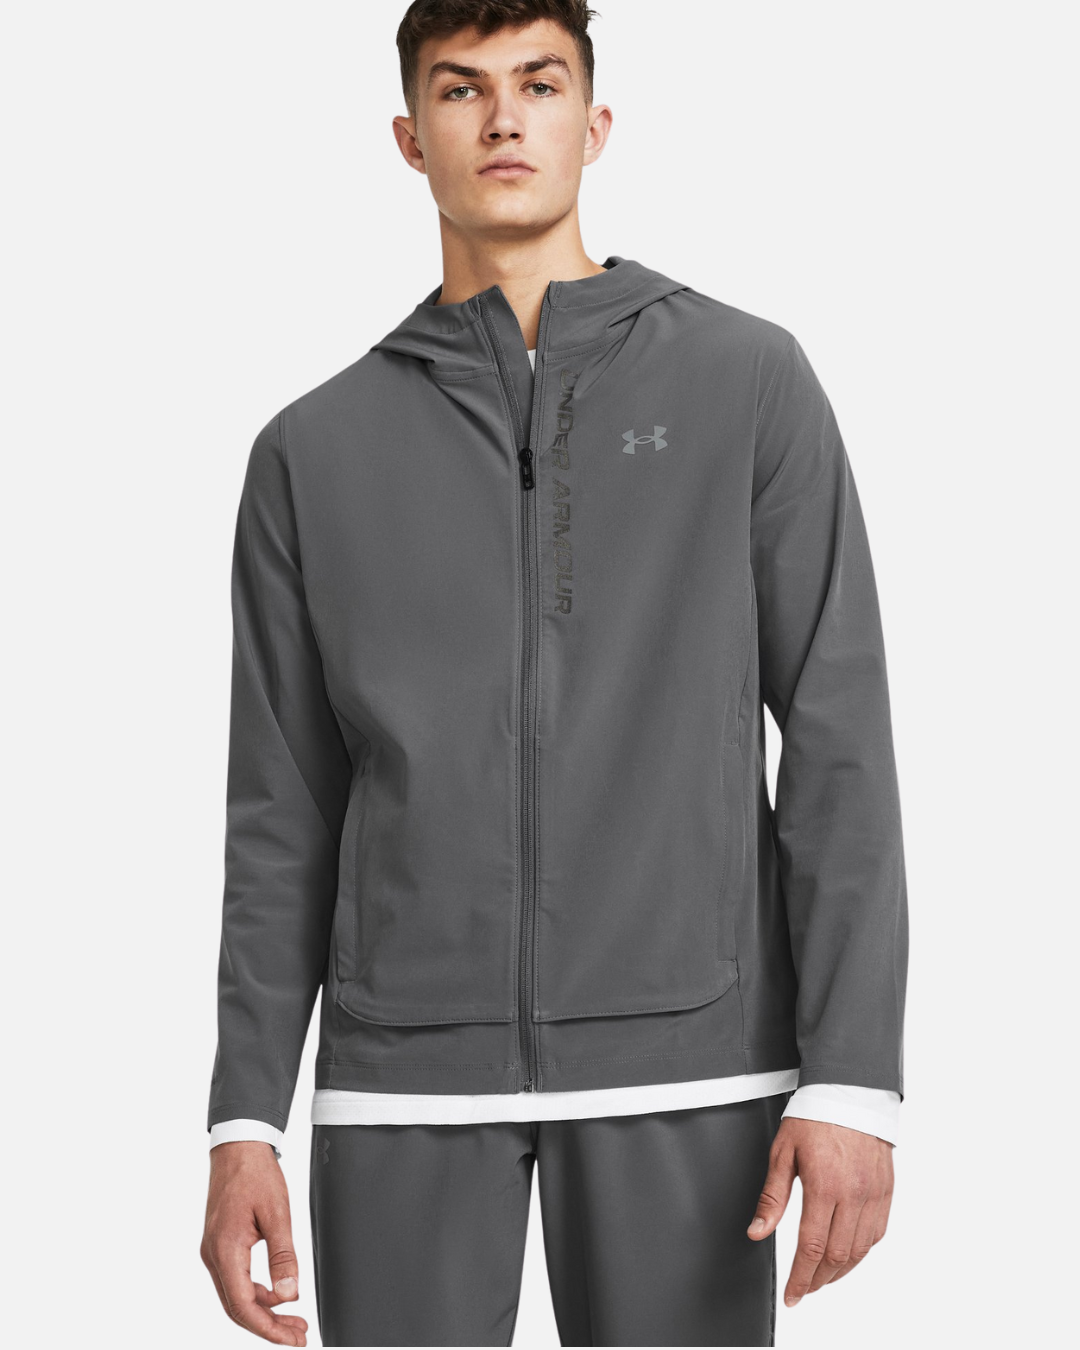 Under Armor Outrun The Storm Track Jacket - Gray